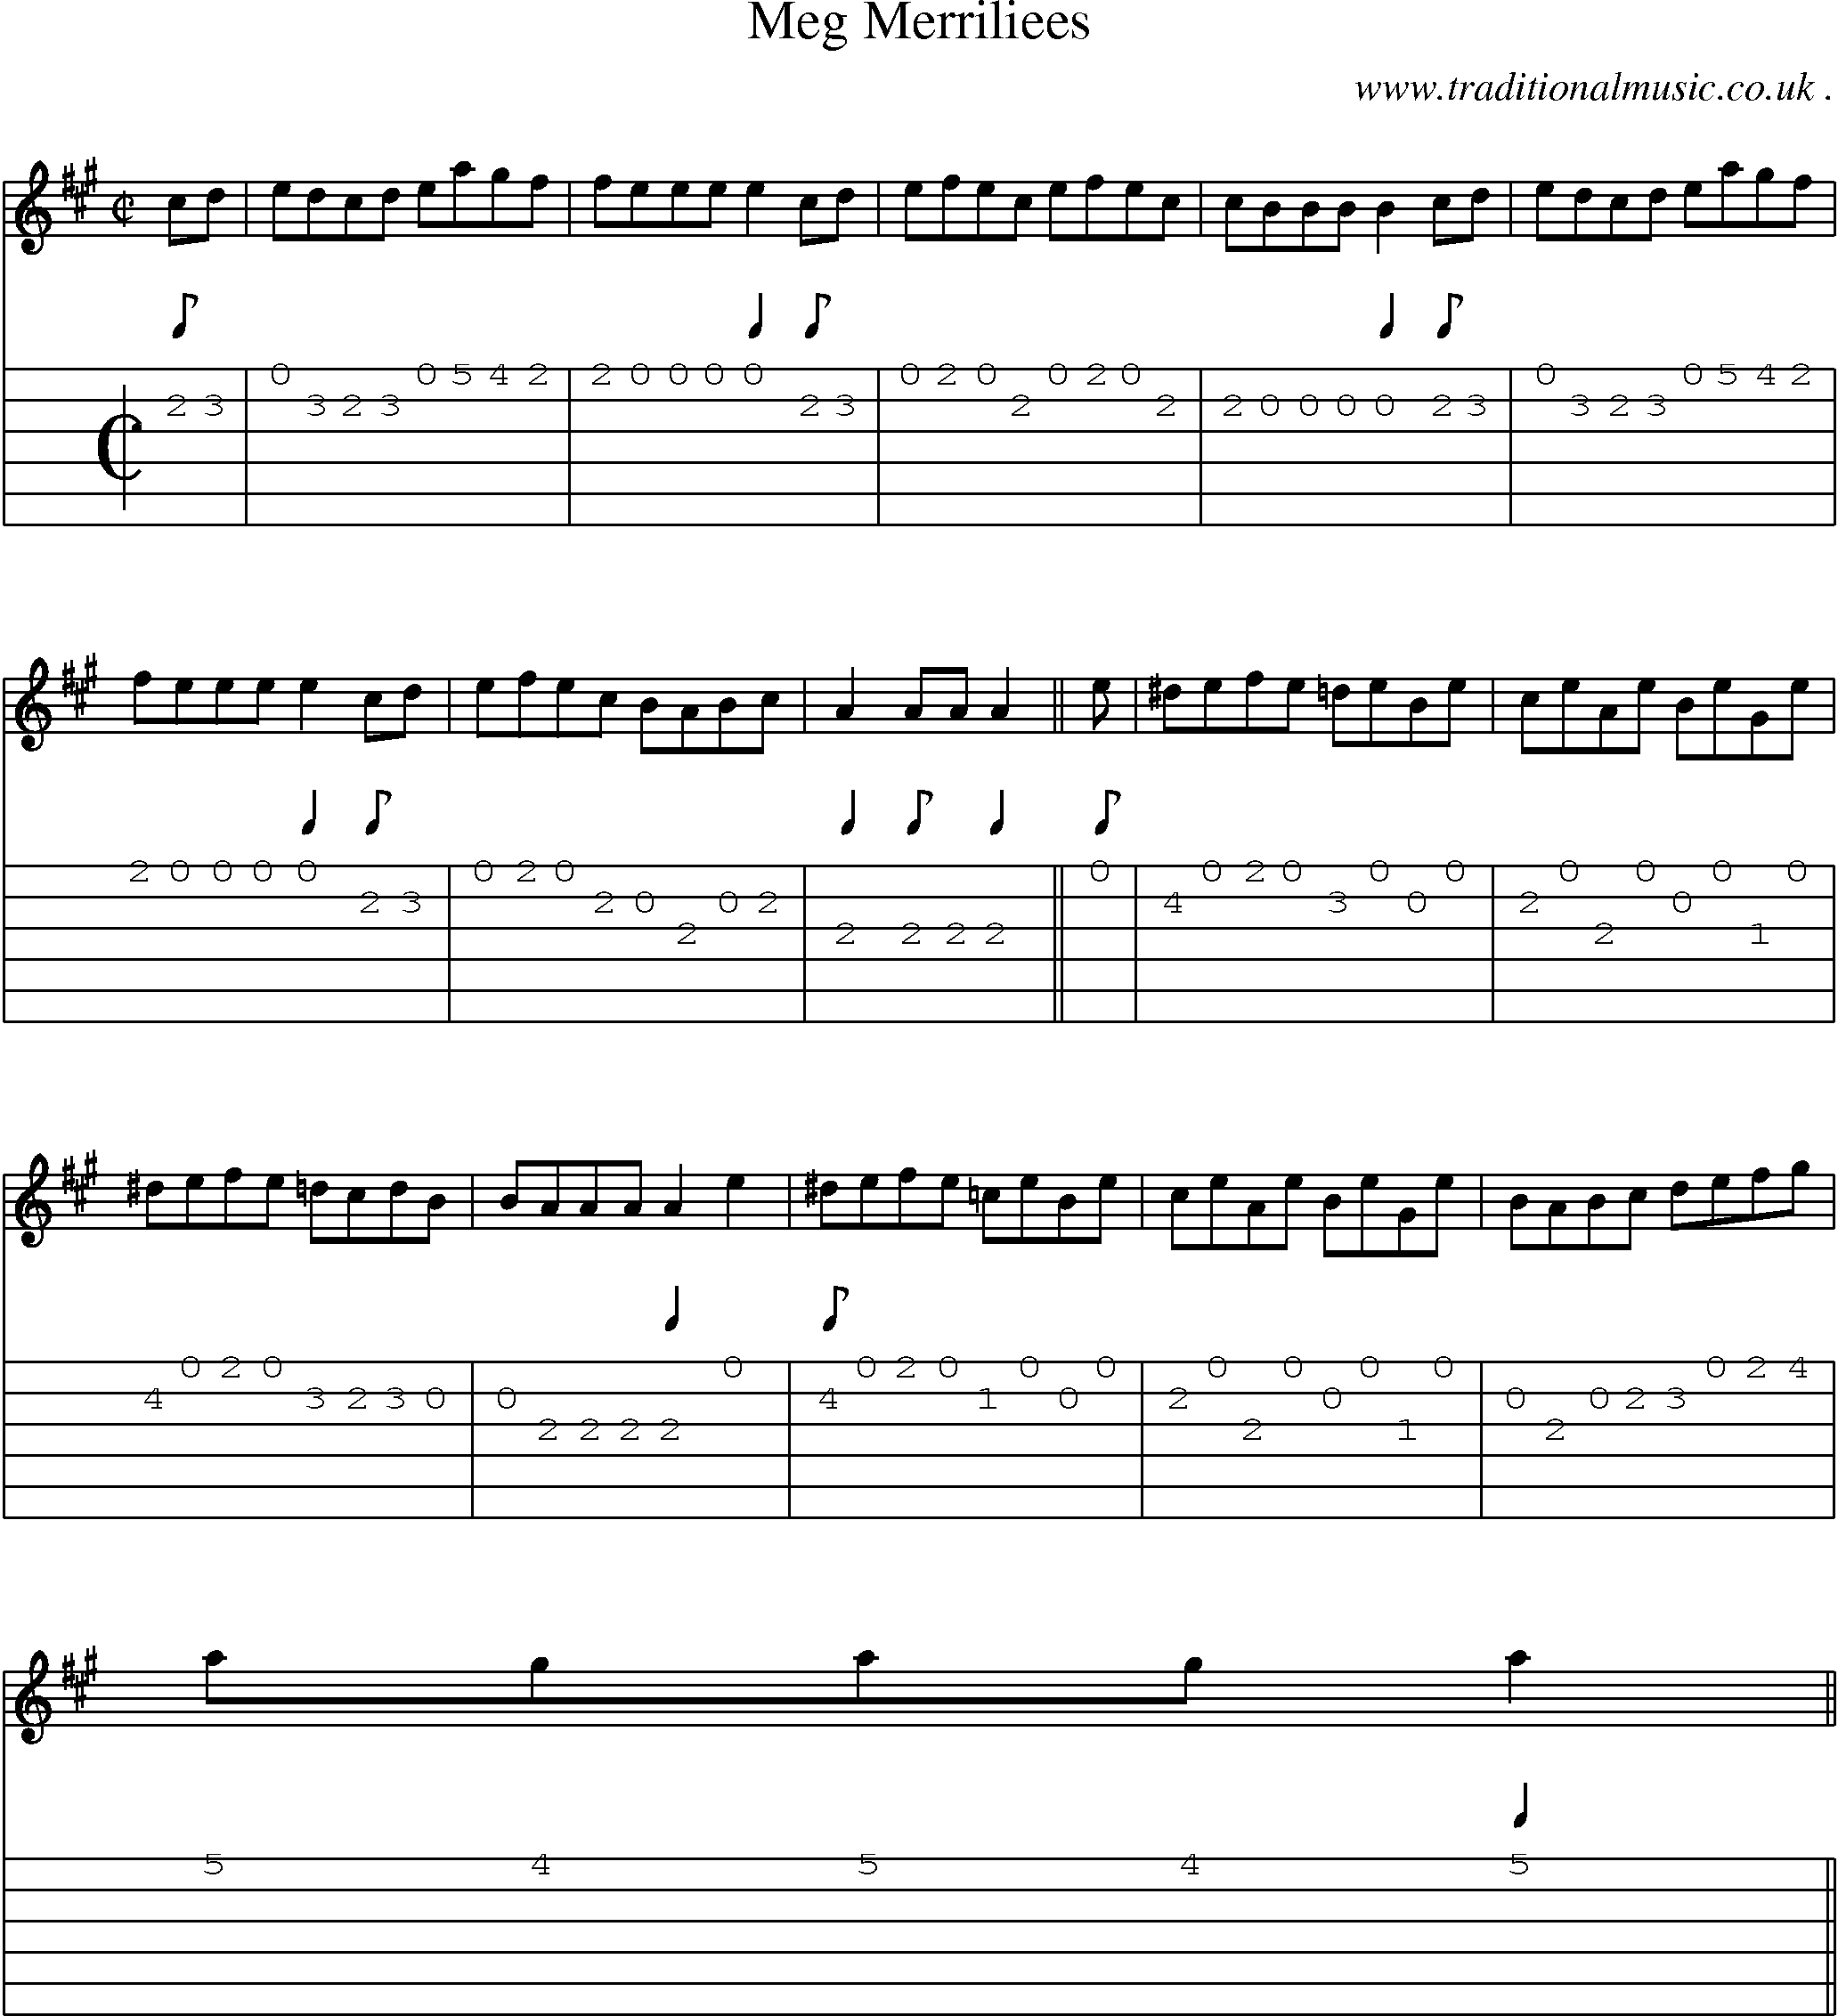 Sheet-music  score, Chords and Guitar Tabs for Meg Merriliees